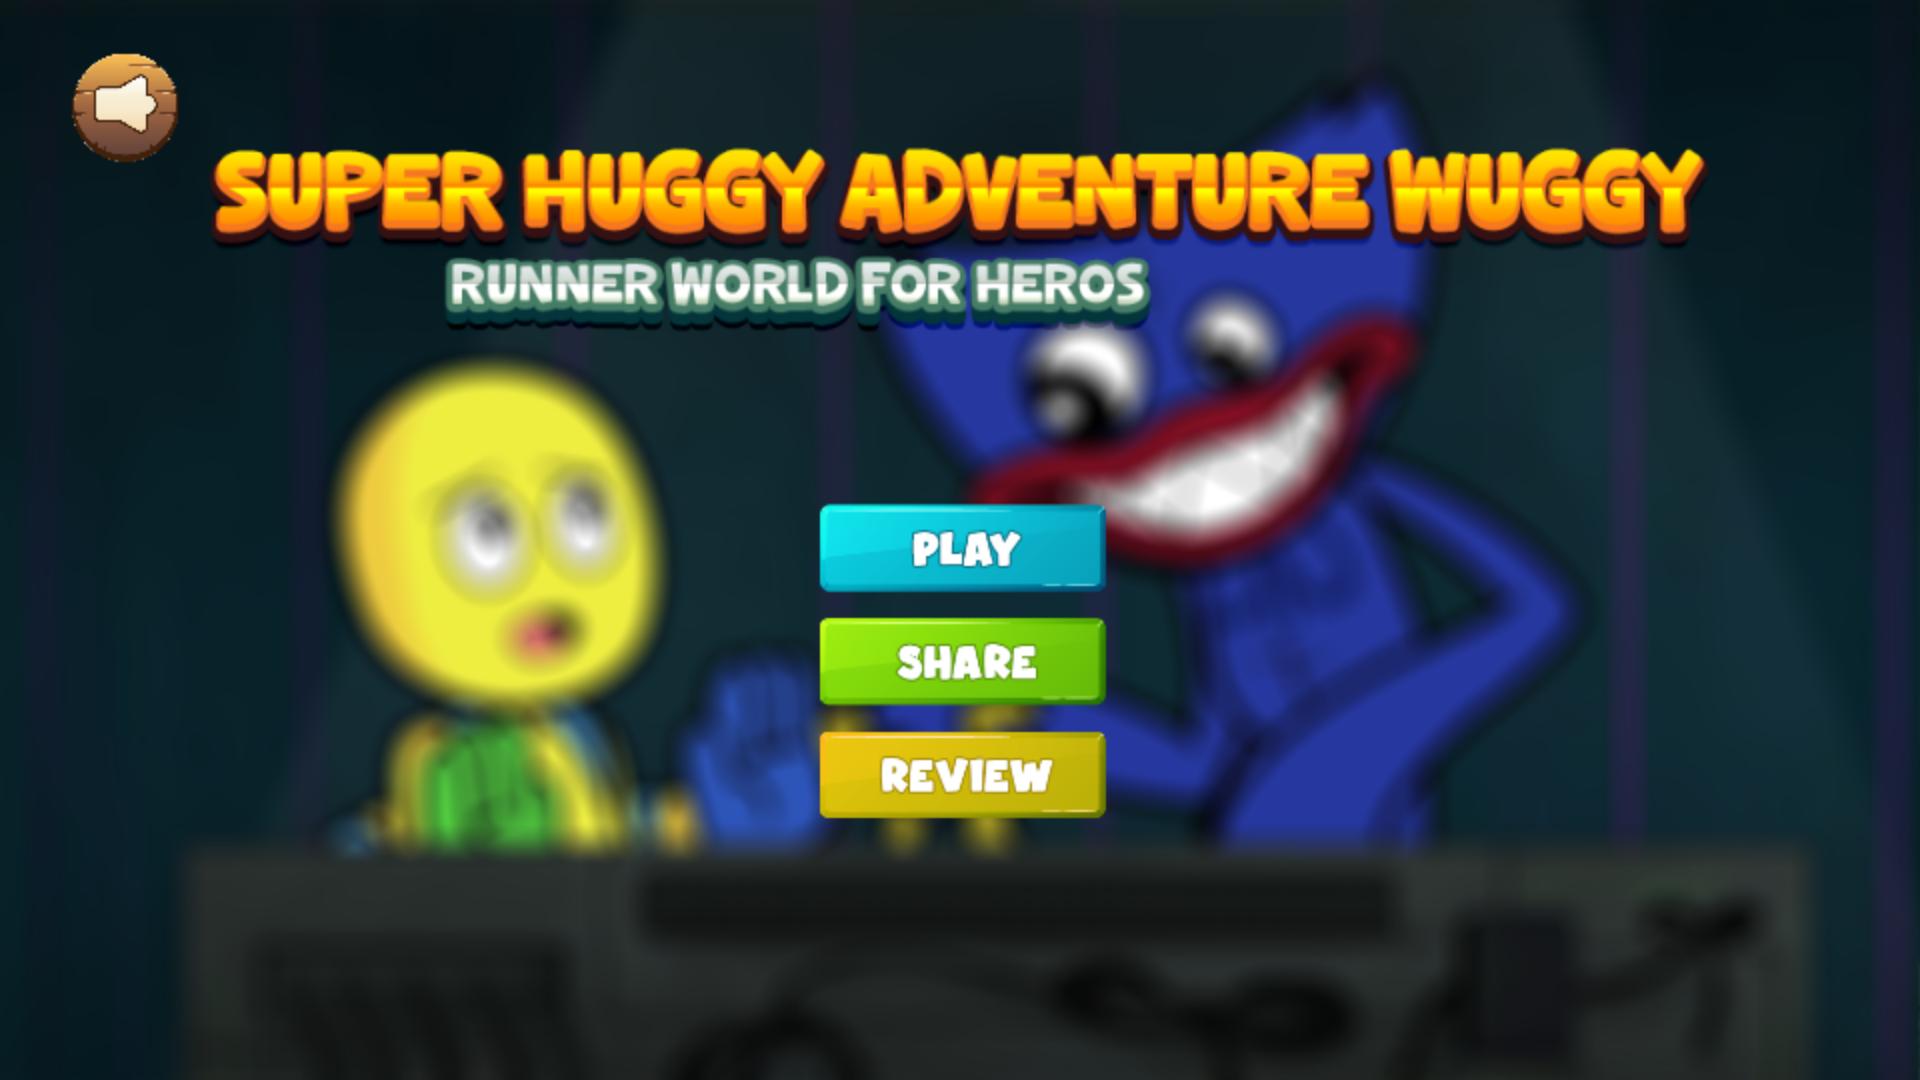 Super Huggy wuggy Game Poppy